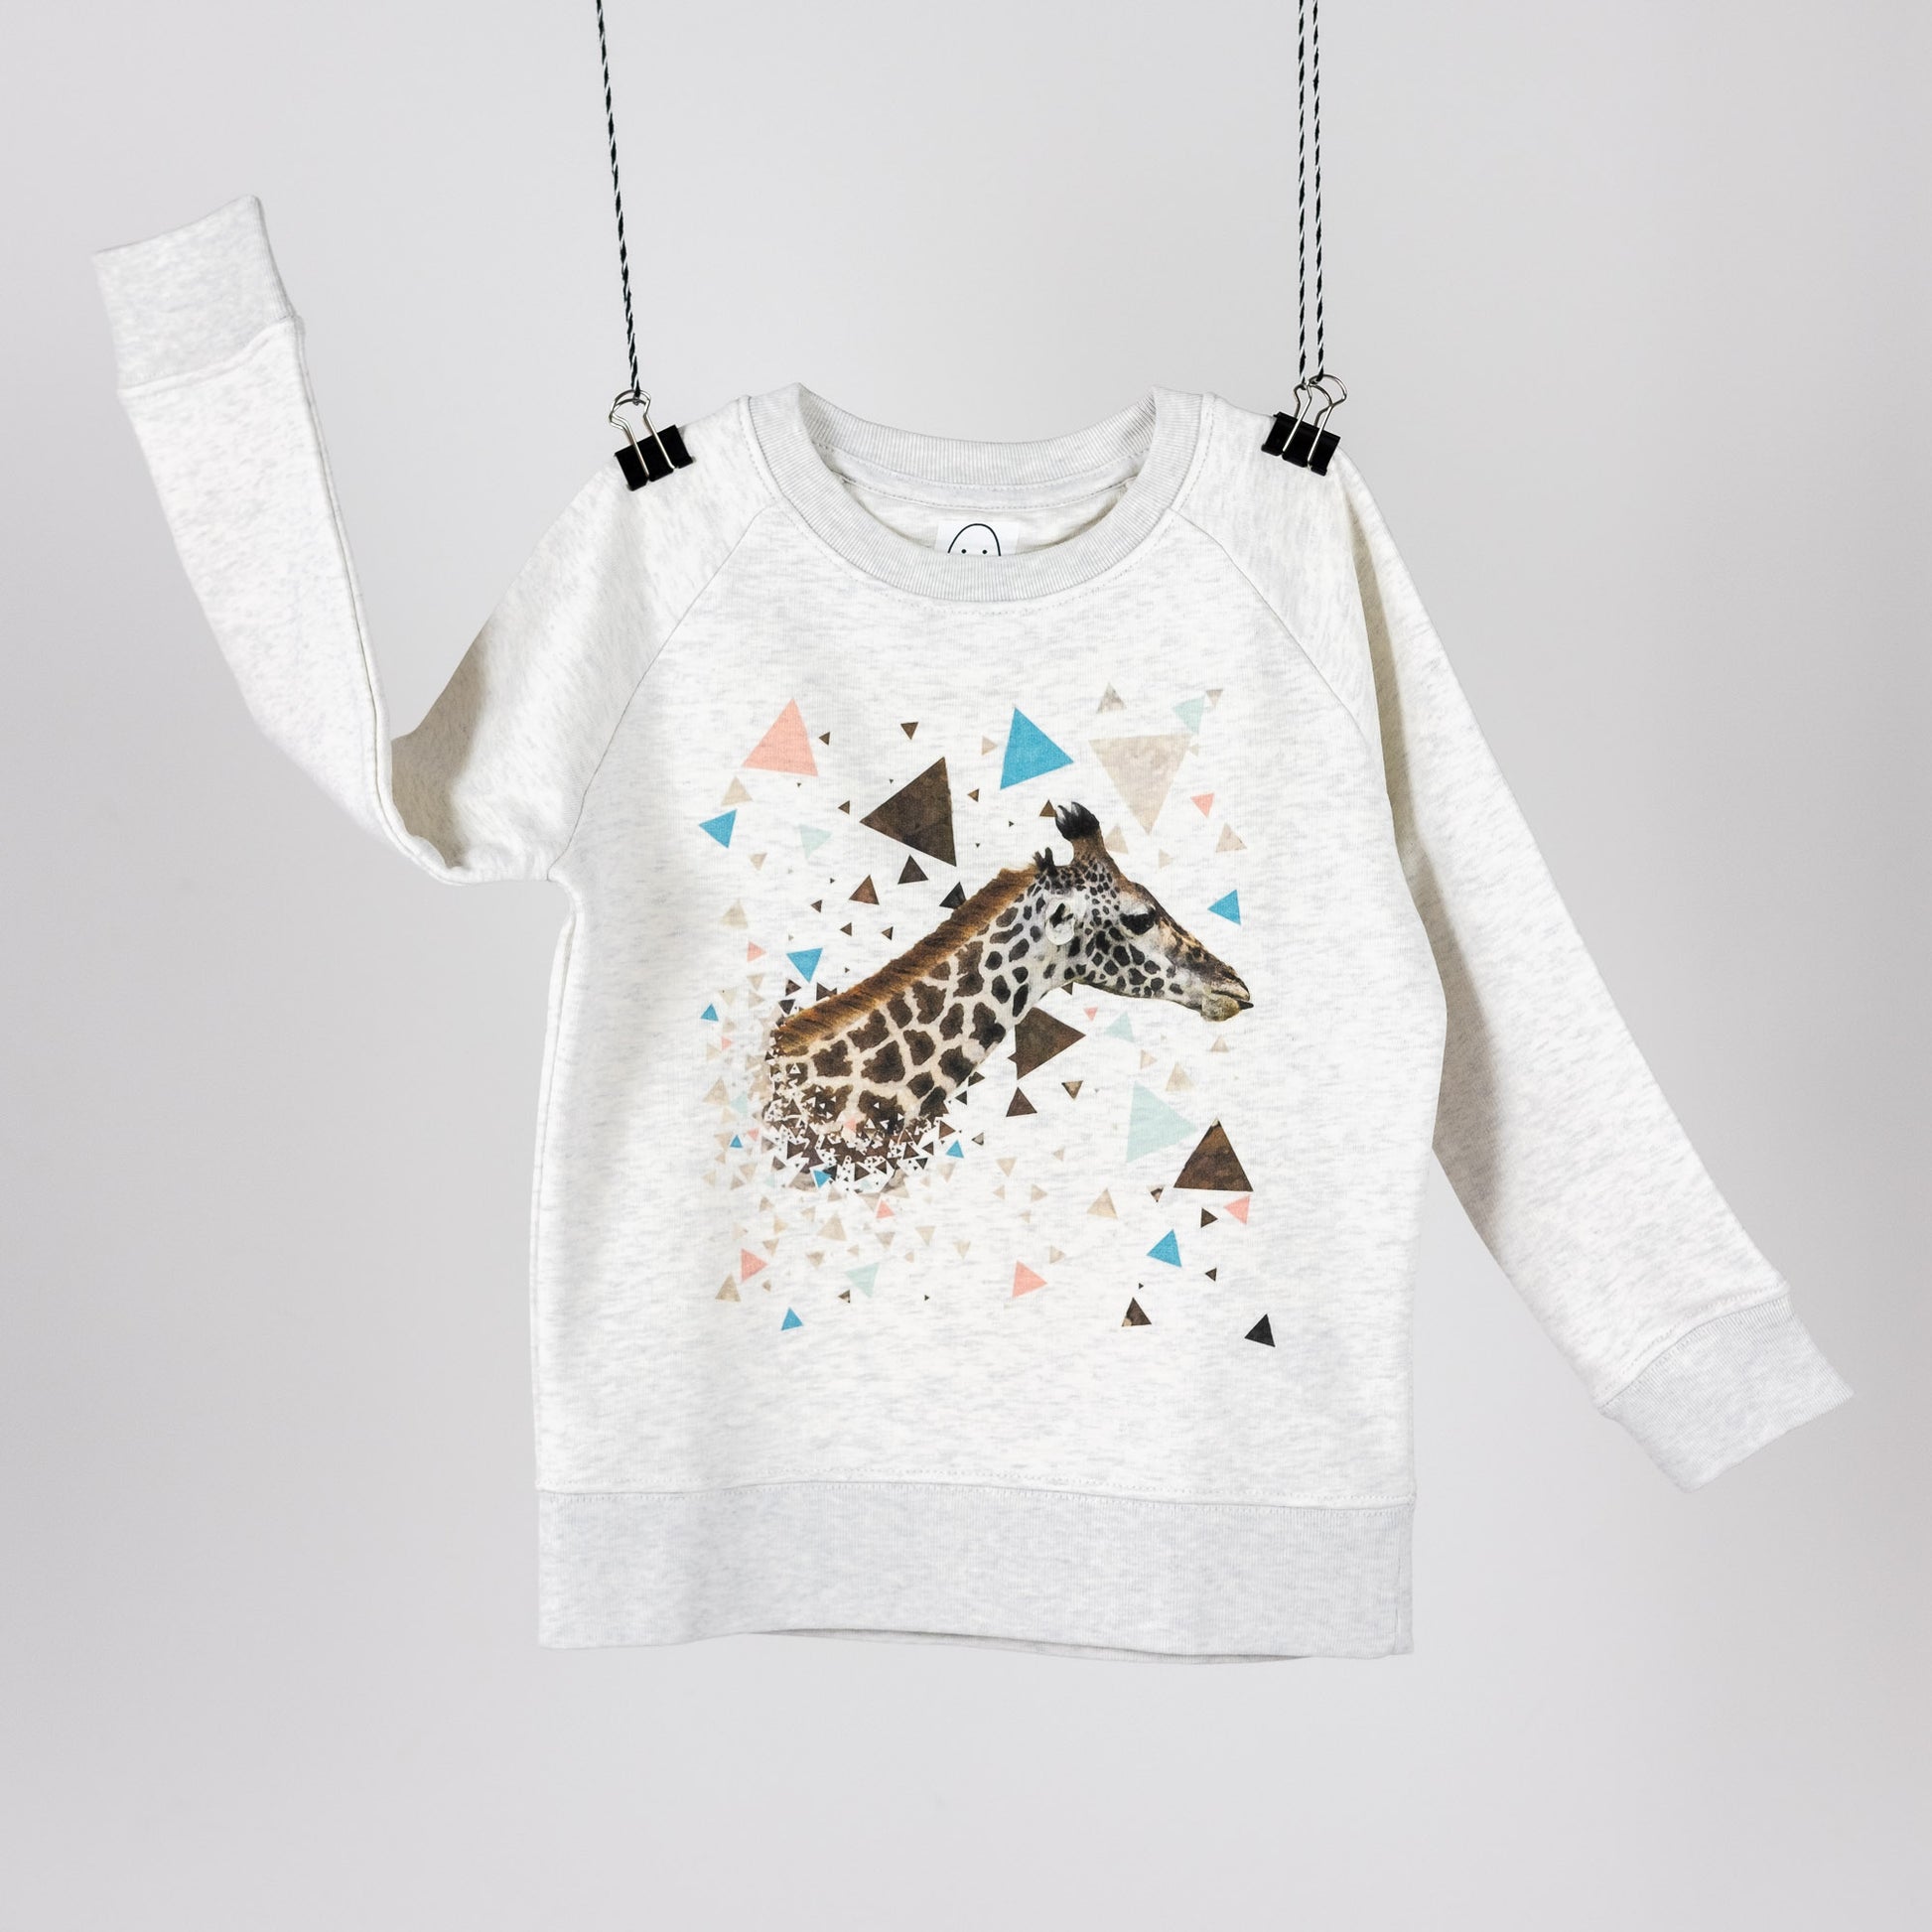 Grey Terry children's sweatshirt featuring a digital print with a giraffe baby and colourful triangles. Screen printed logo in the neck. Front view